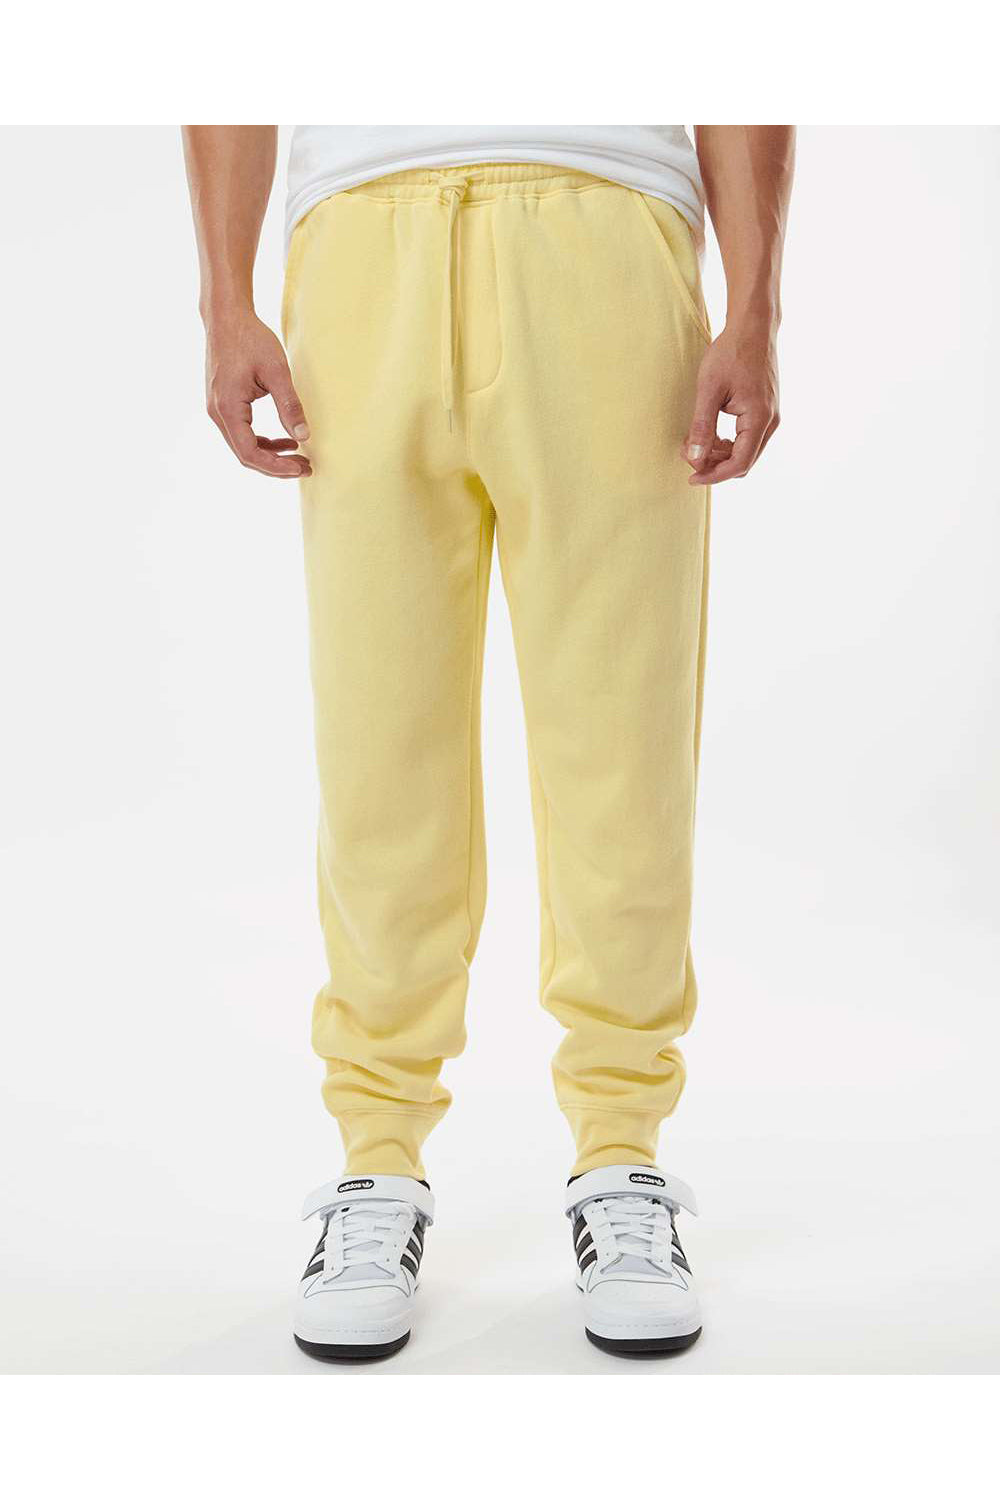 Independent Trading Co. IND20PNT Mens Fleece Sweatpants w/ Pockets Light Yellow Model Front